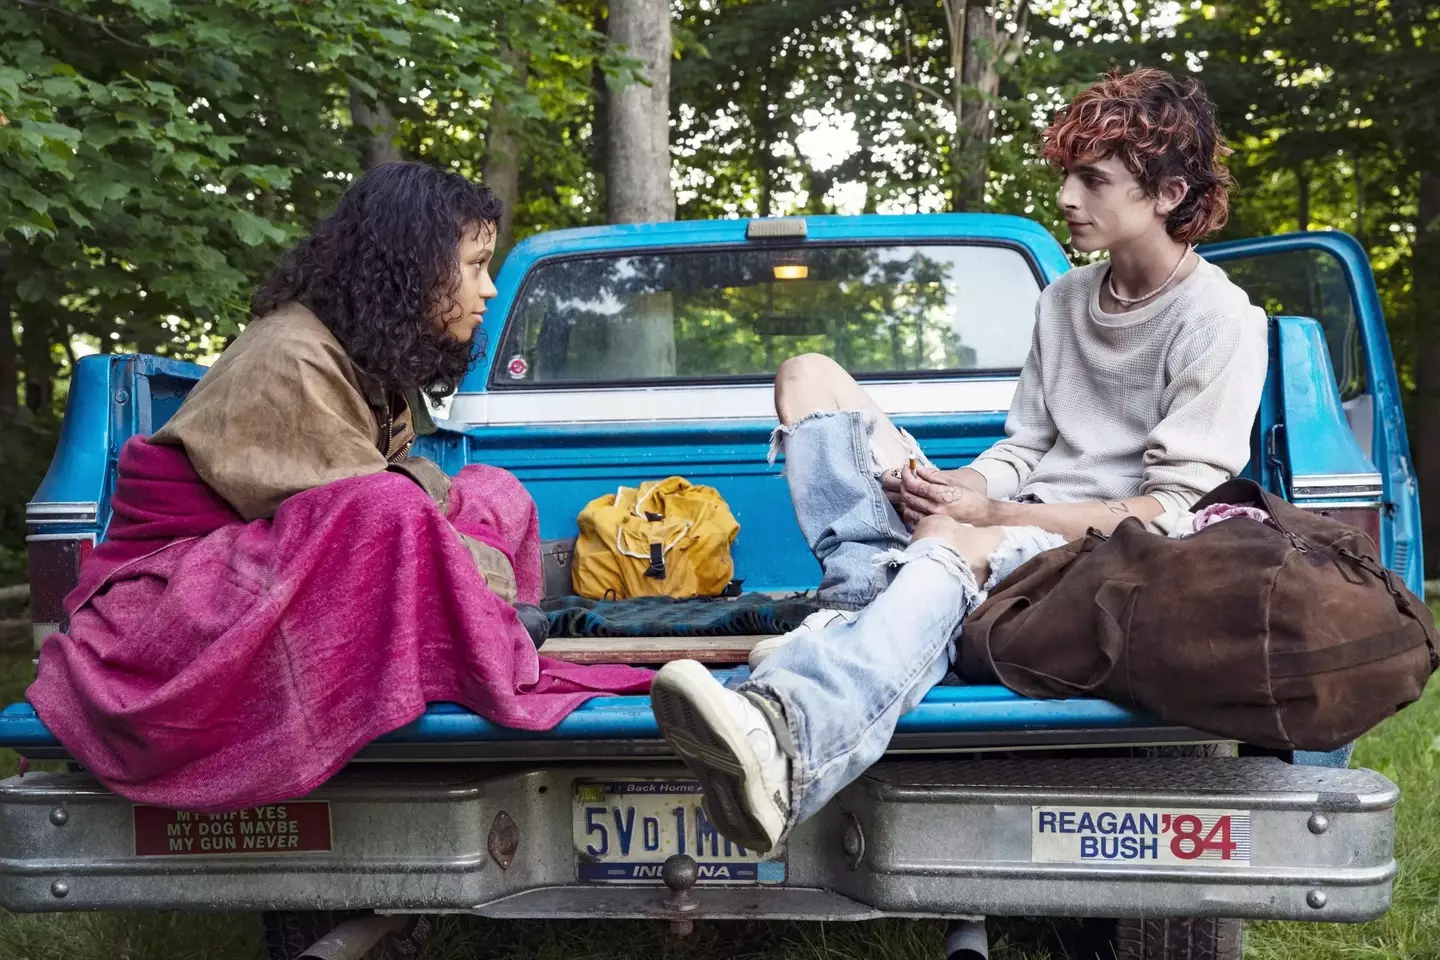 Timothée Chalamet and Taylor Russell in Bones and All.